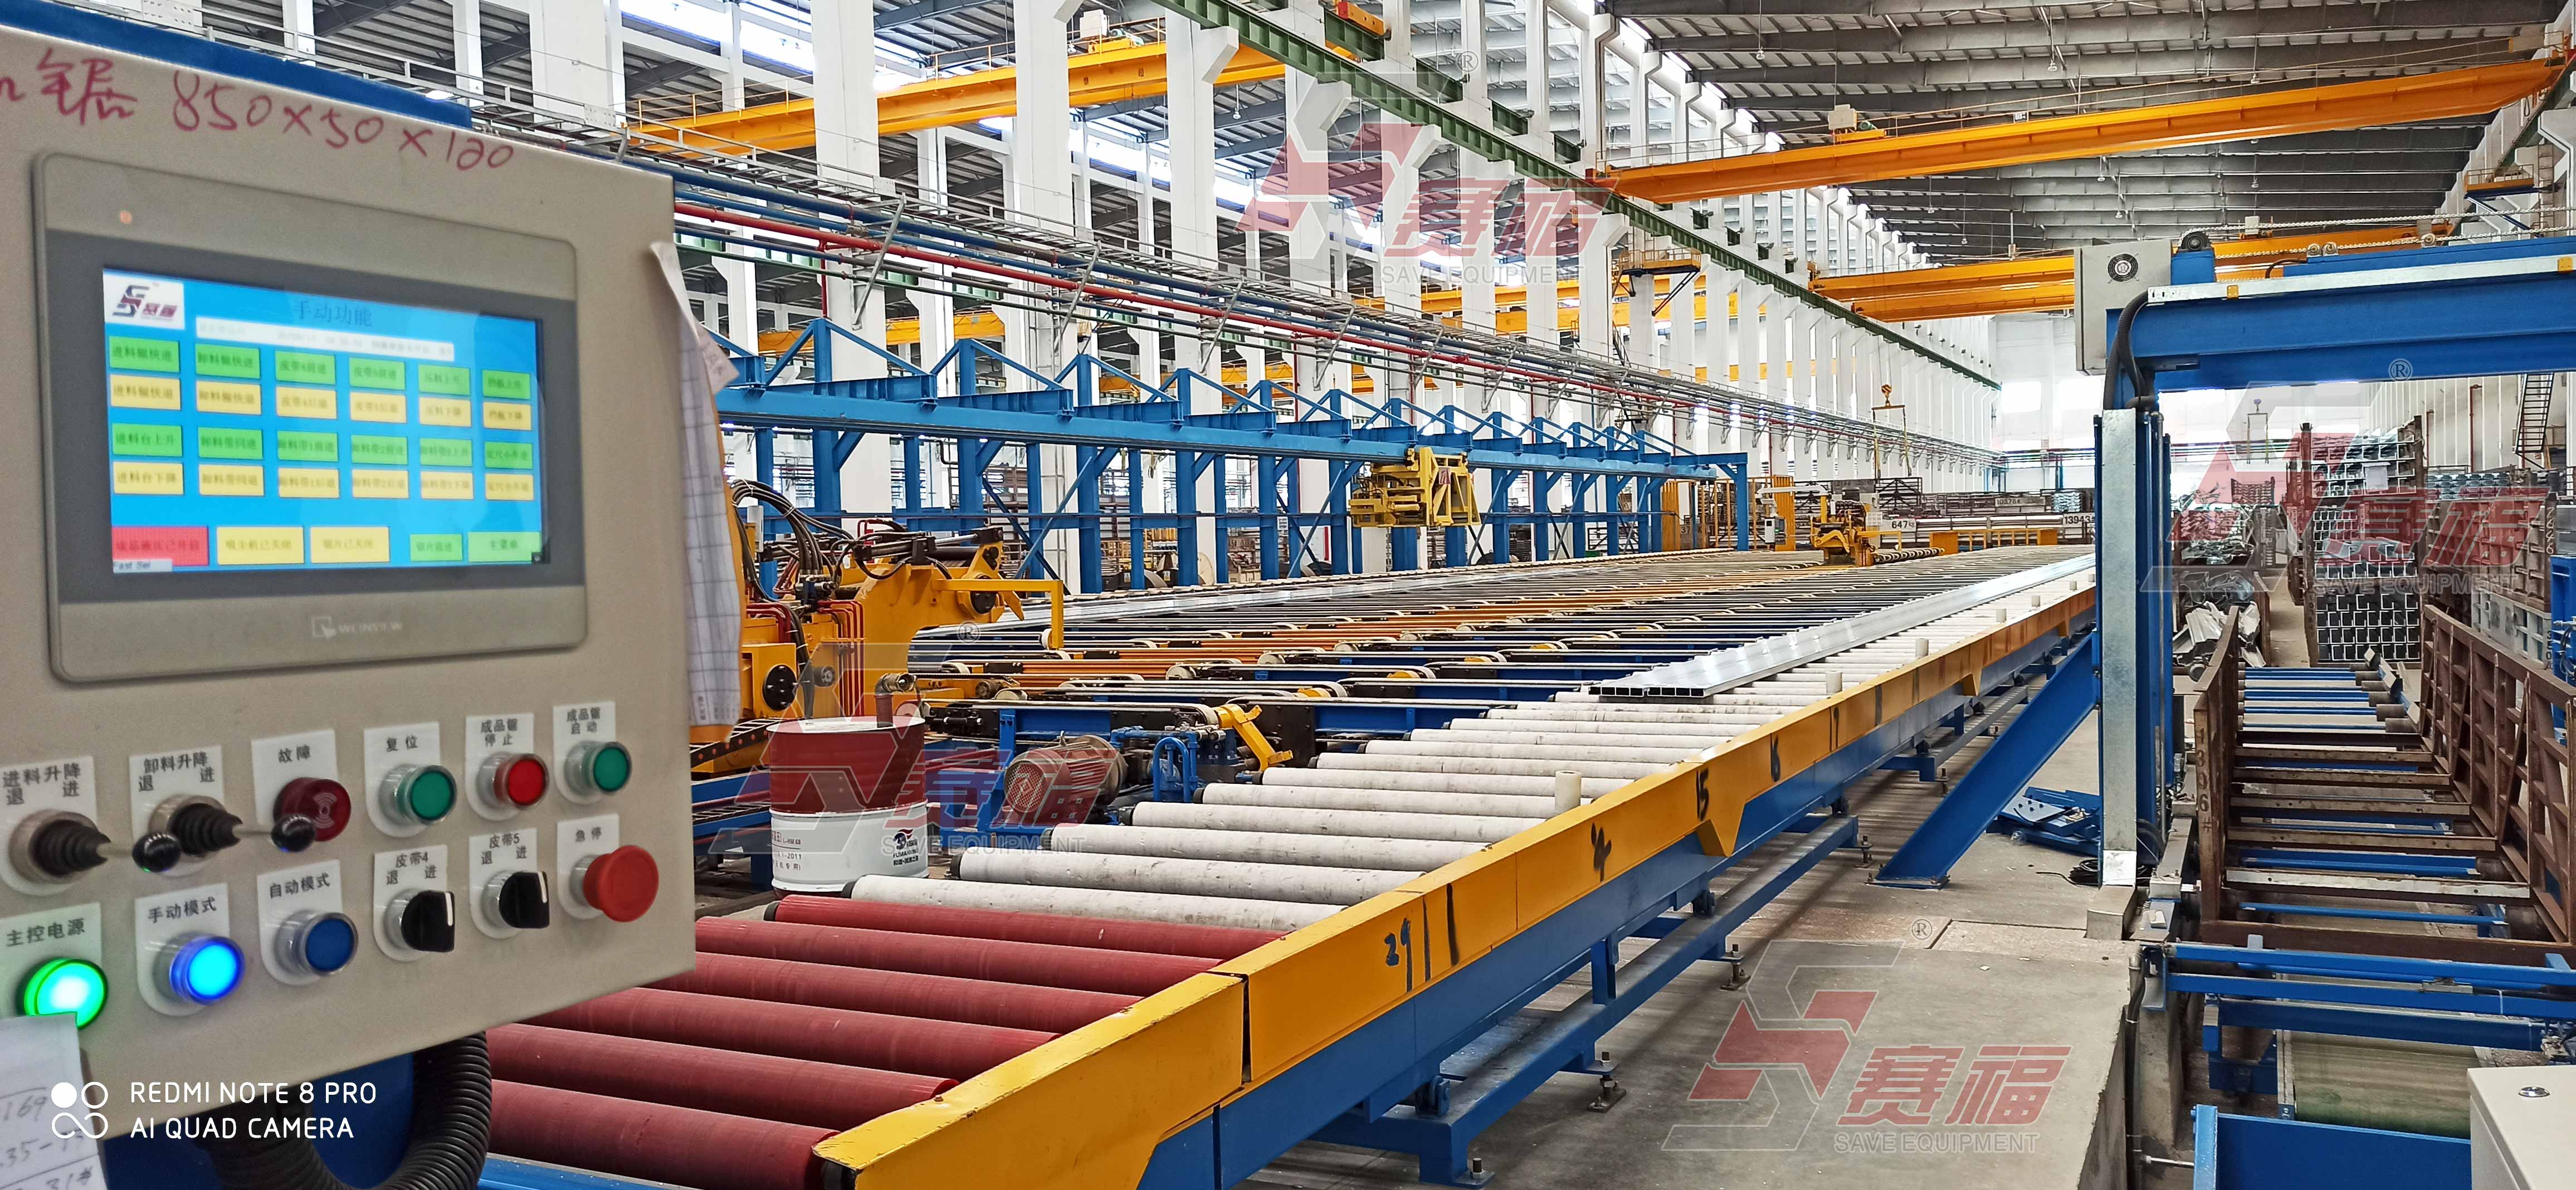 In celebration of the installation of handling system for 1450-ton extrusion line to Guangdong Coyo precision machinery